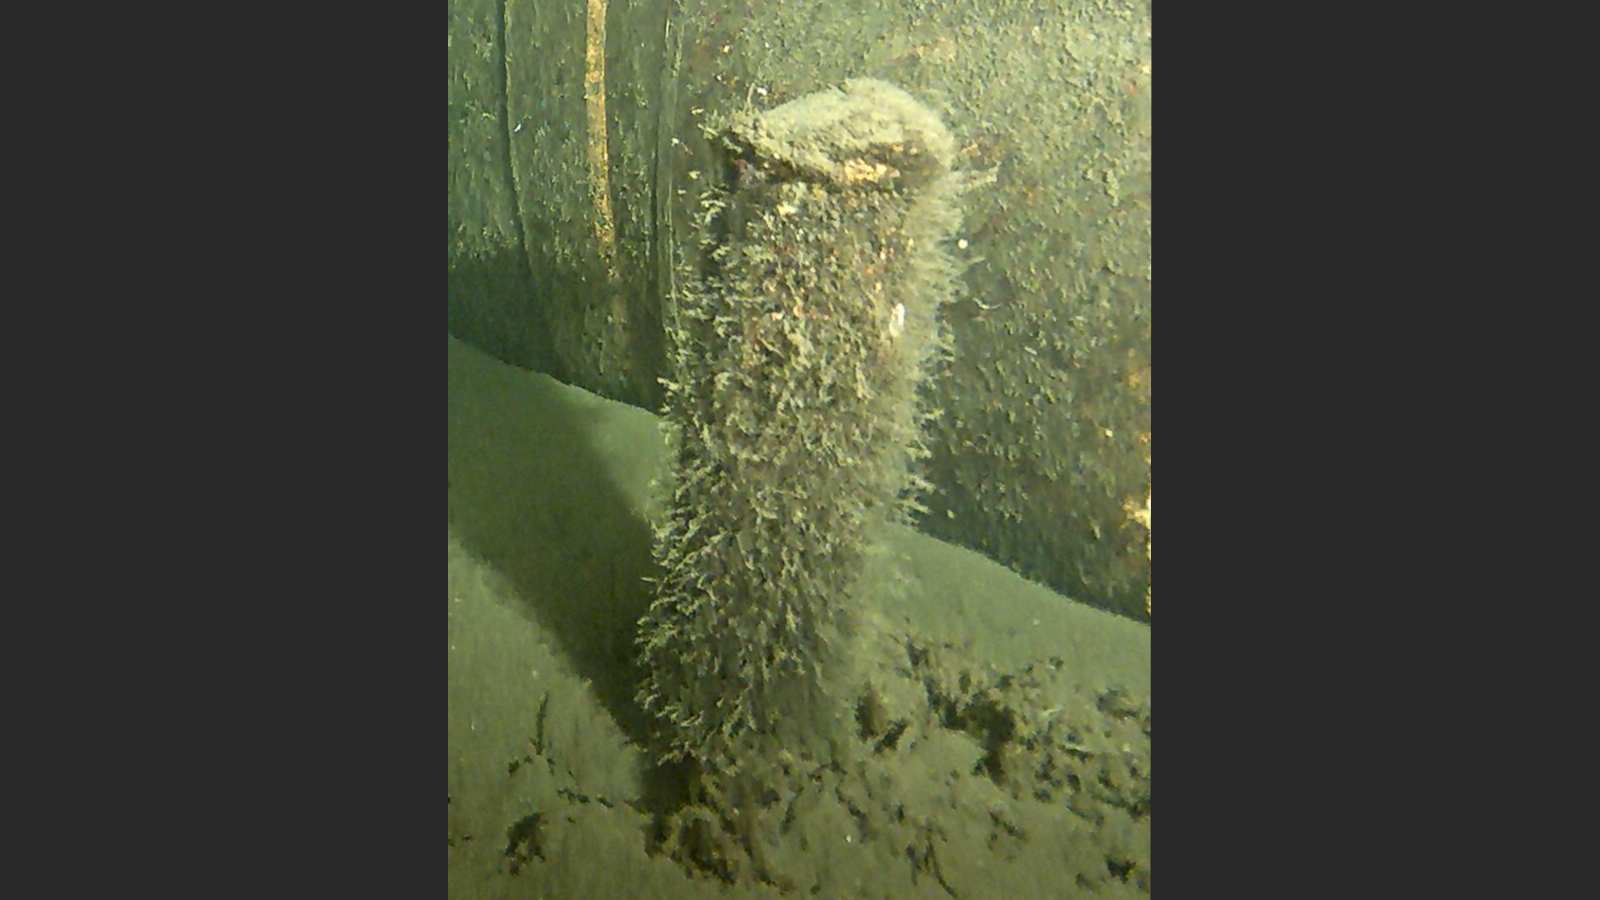 An unidentified object found close to the only remaining intact gas pipeline under the Baltic Sea, in this undated handout image released by the Danish Energy Agency and Danish Ministry of Defense on March 24, 2023. /CFP